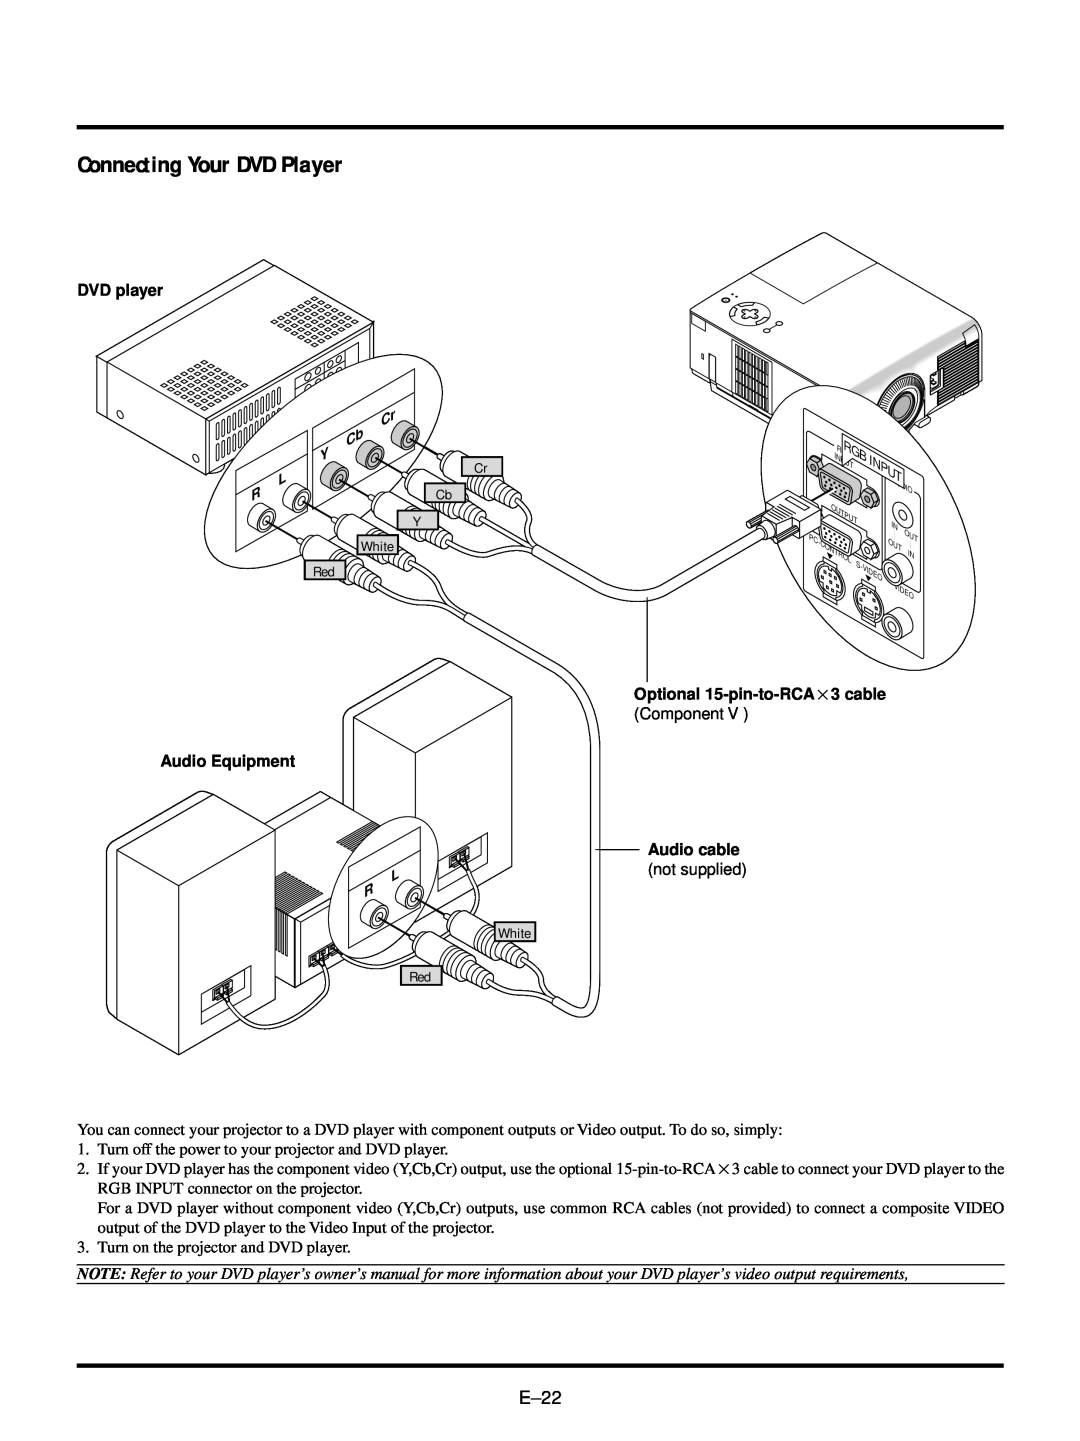 NEC VT440, VT540 user manual Connecting Your DVD Player, E-22 